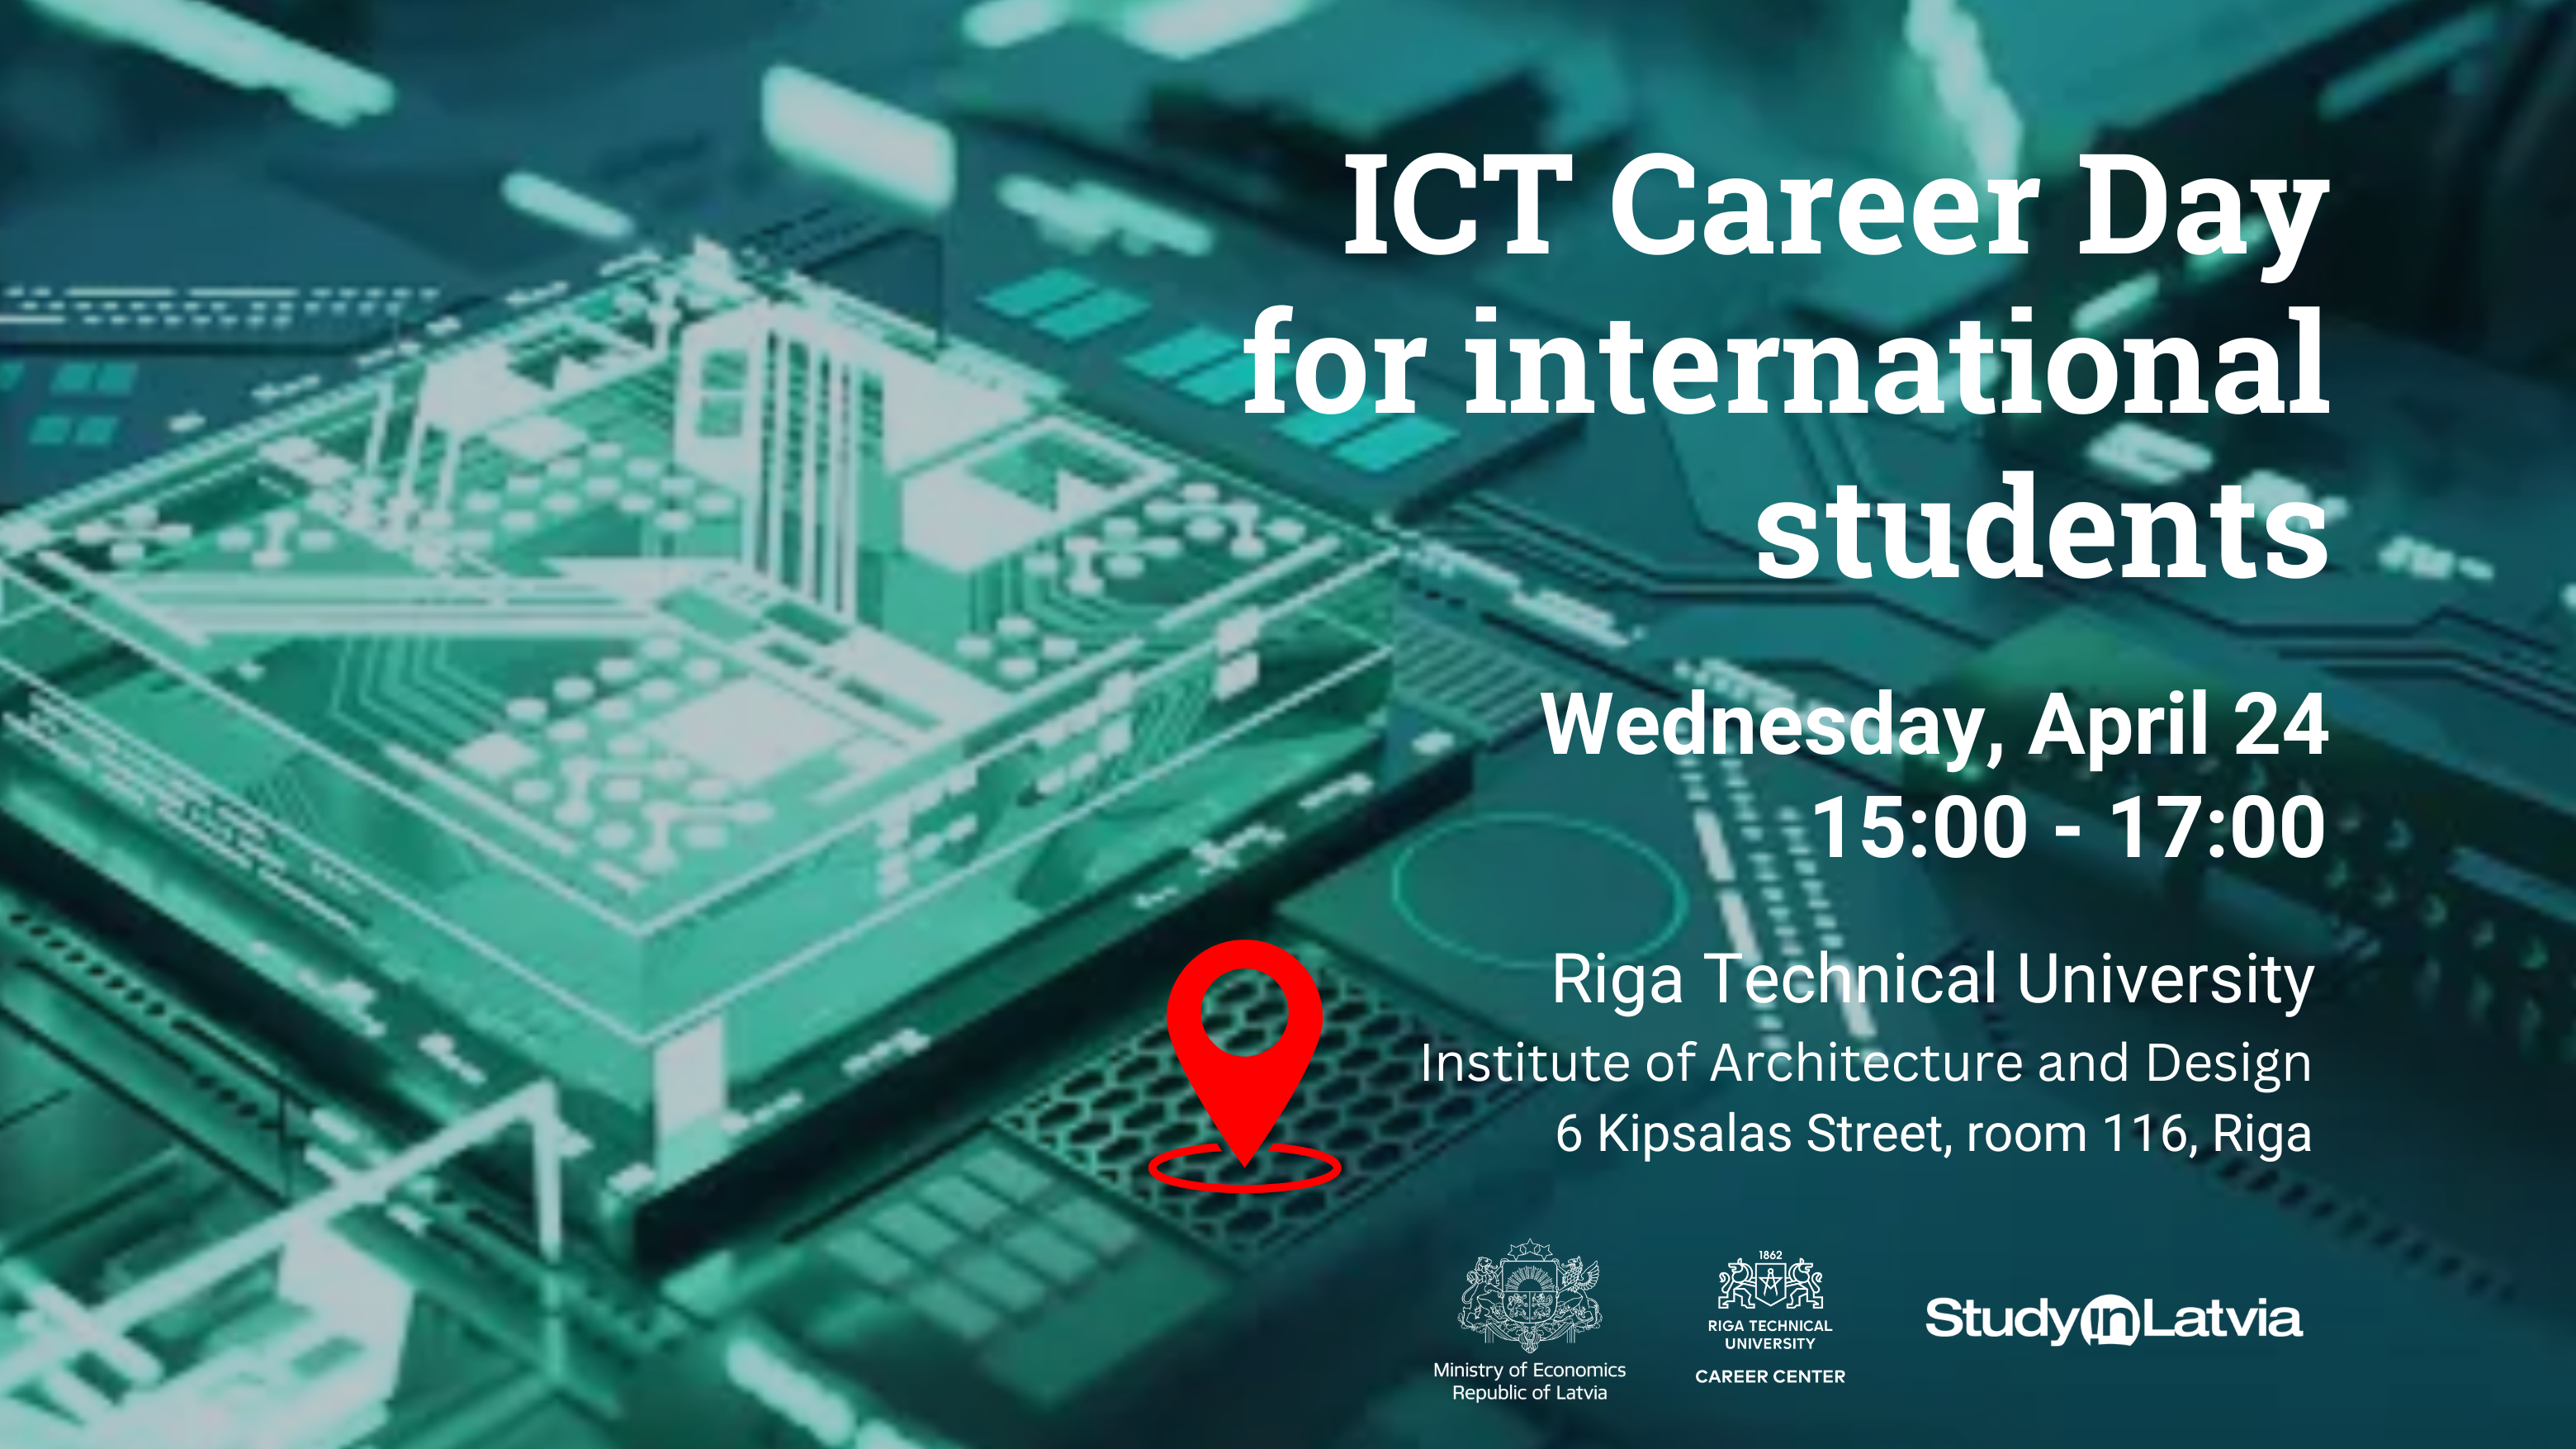 ICT Career Day for International Students